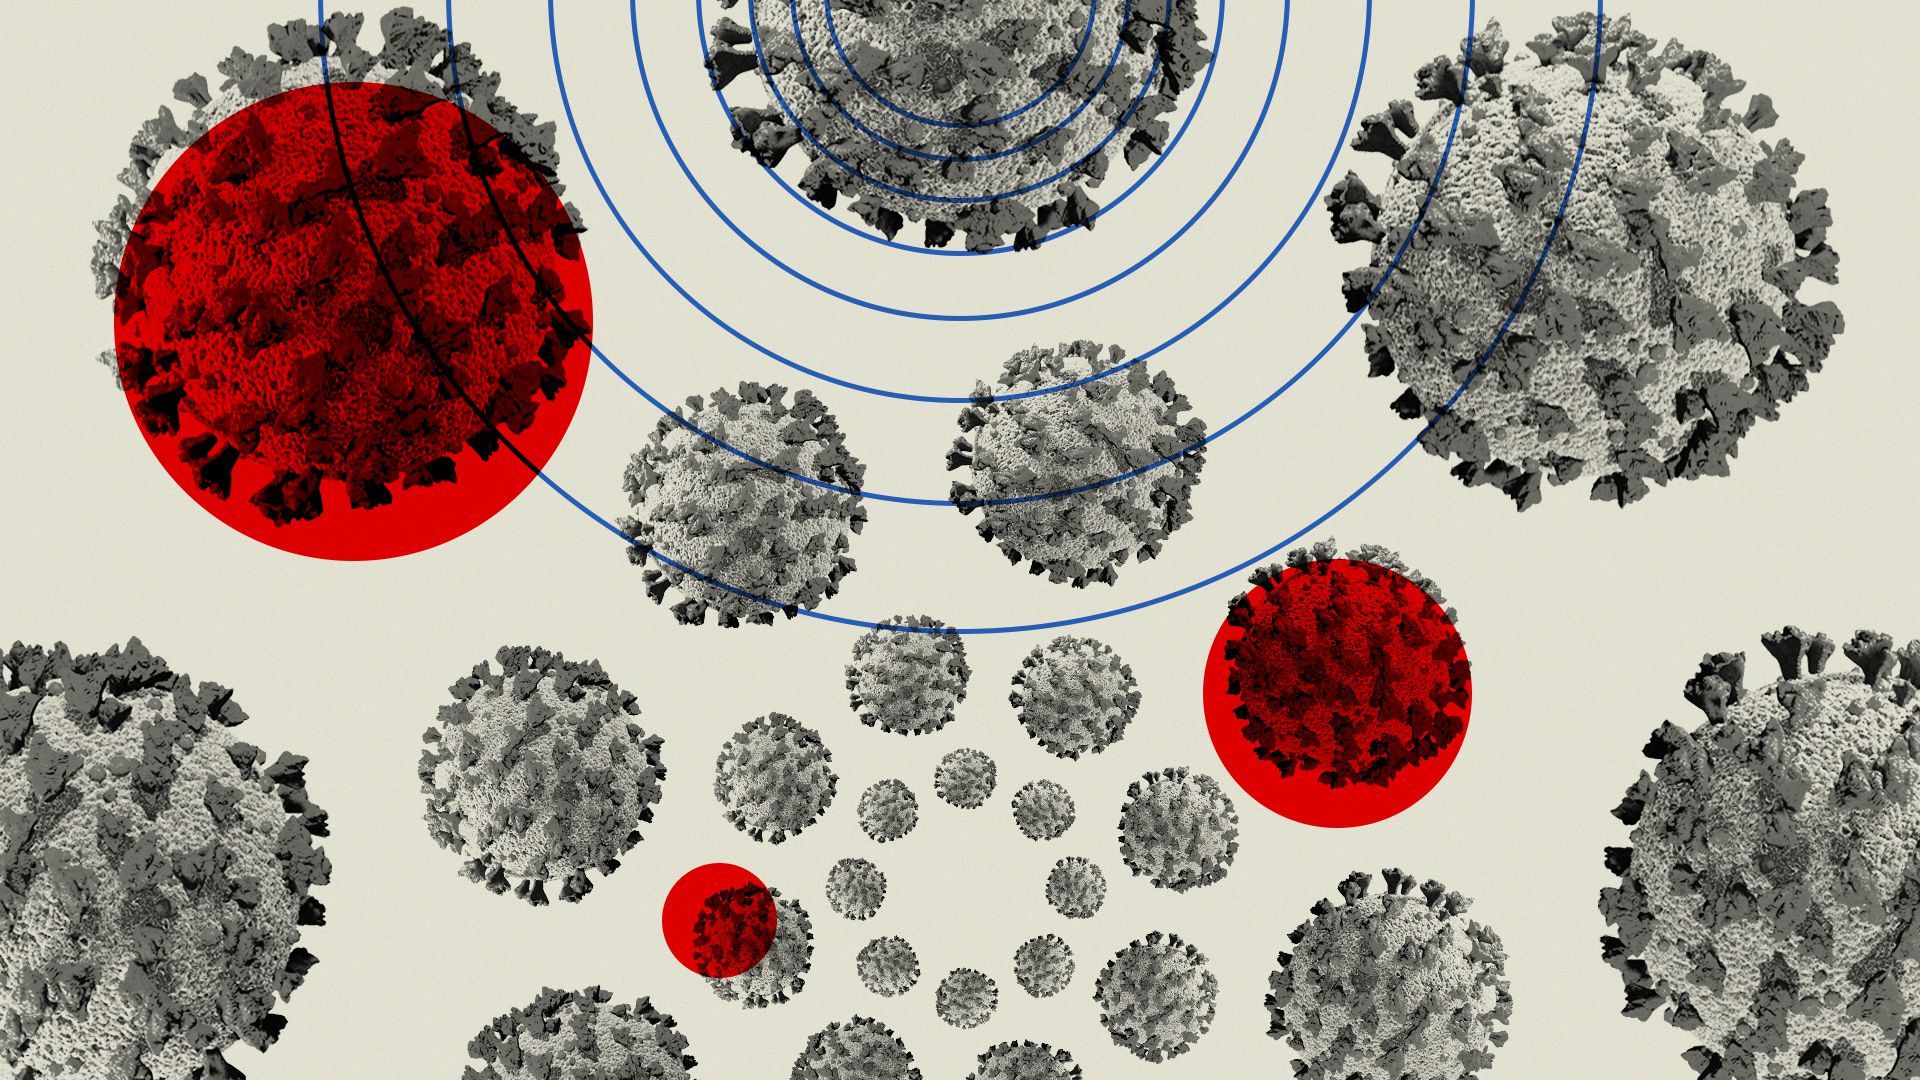 Illustration of COVID cells arranged in a radial pattern with red circles overlaid on the image. 